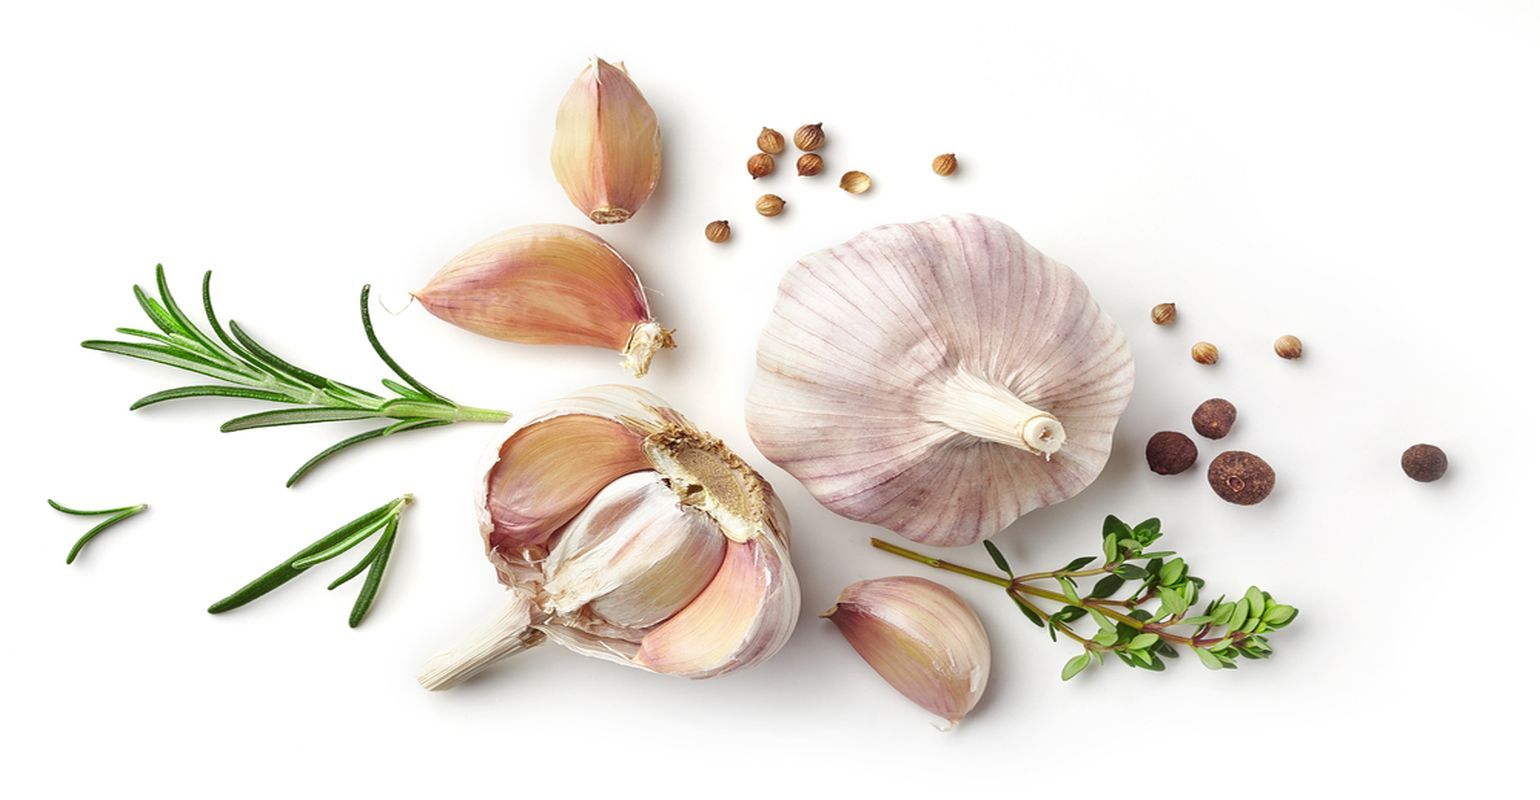 Essential Oils From Garlic and Other Herbs Kill Lyme Disease Bacterium